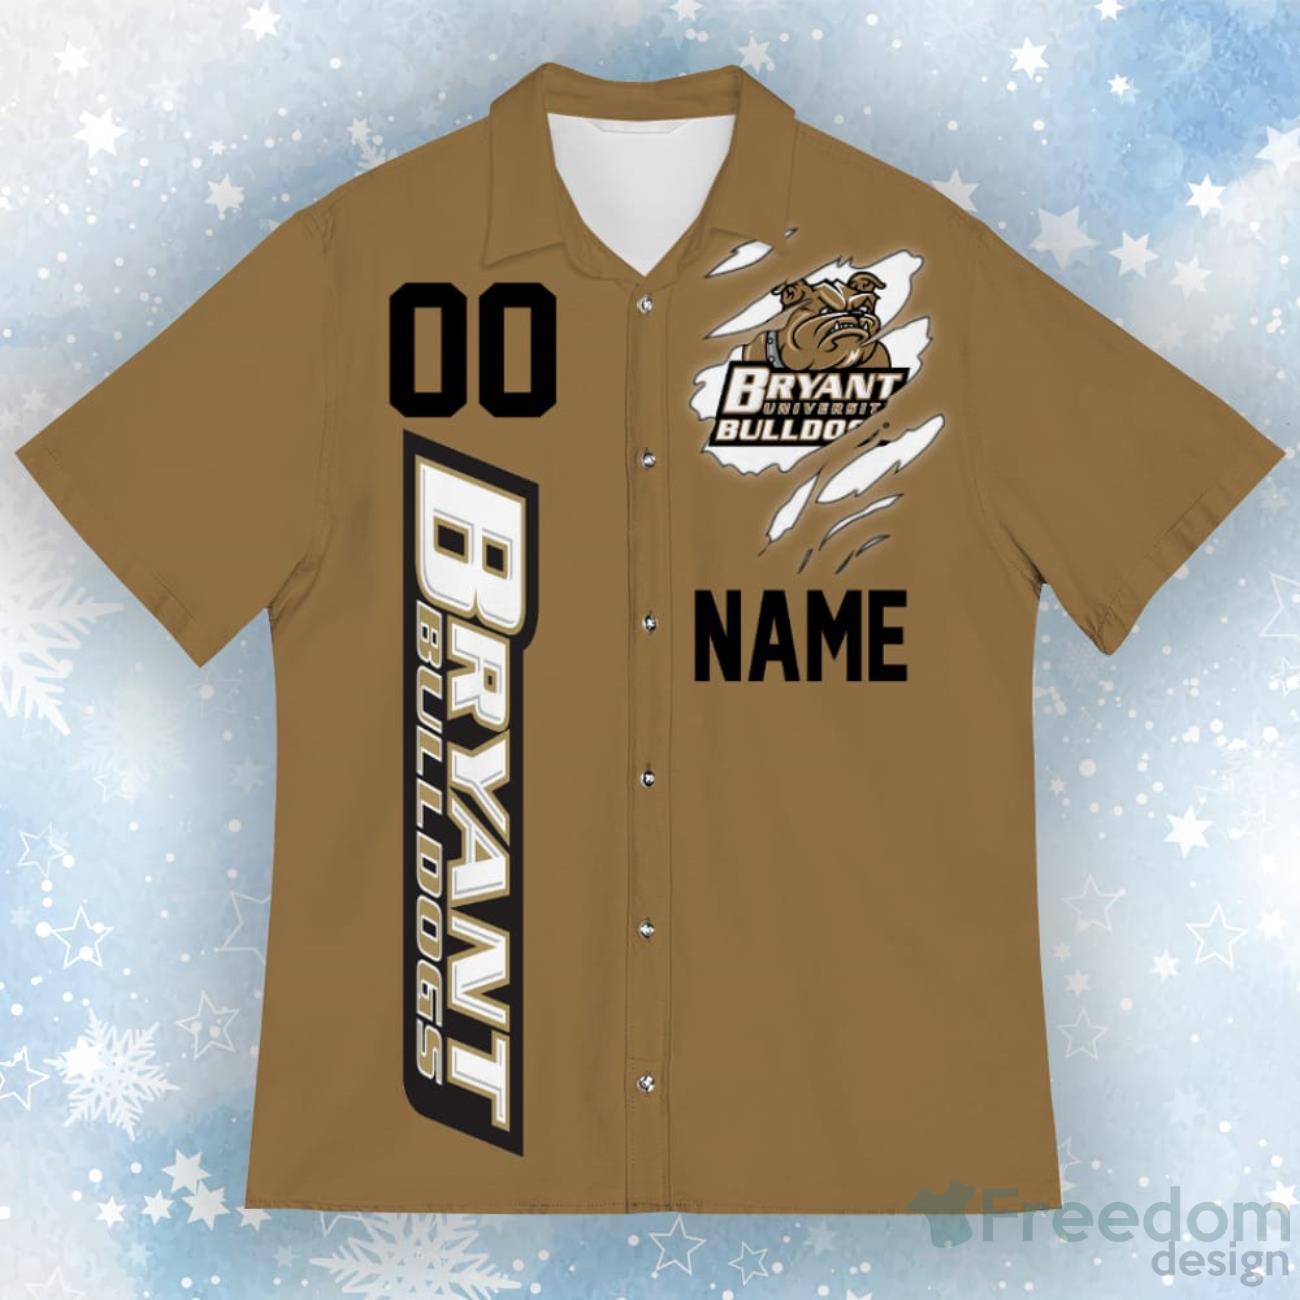 All Star Dogs: Bryant University Bulldogs Pet apparel and accessories